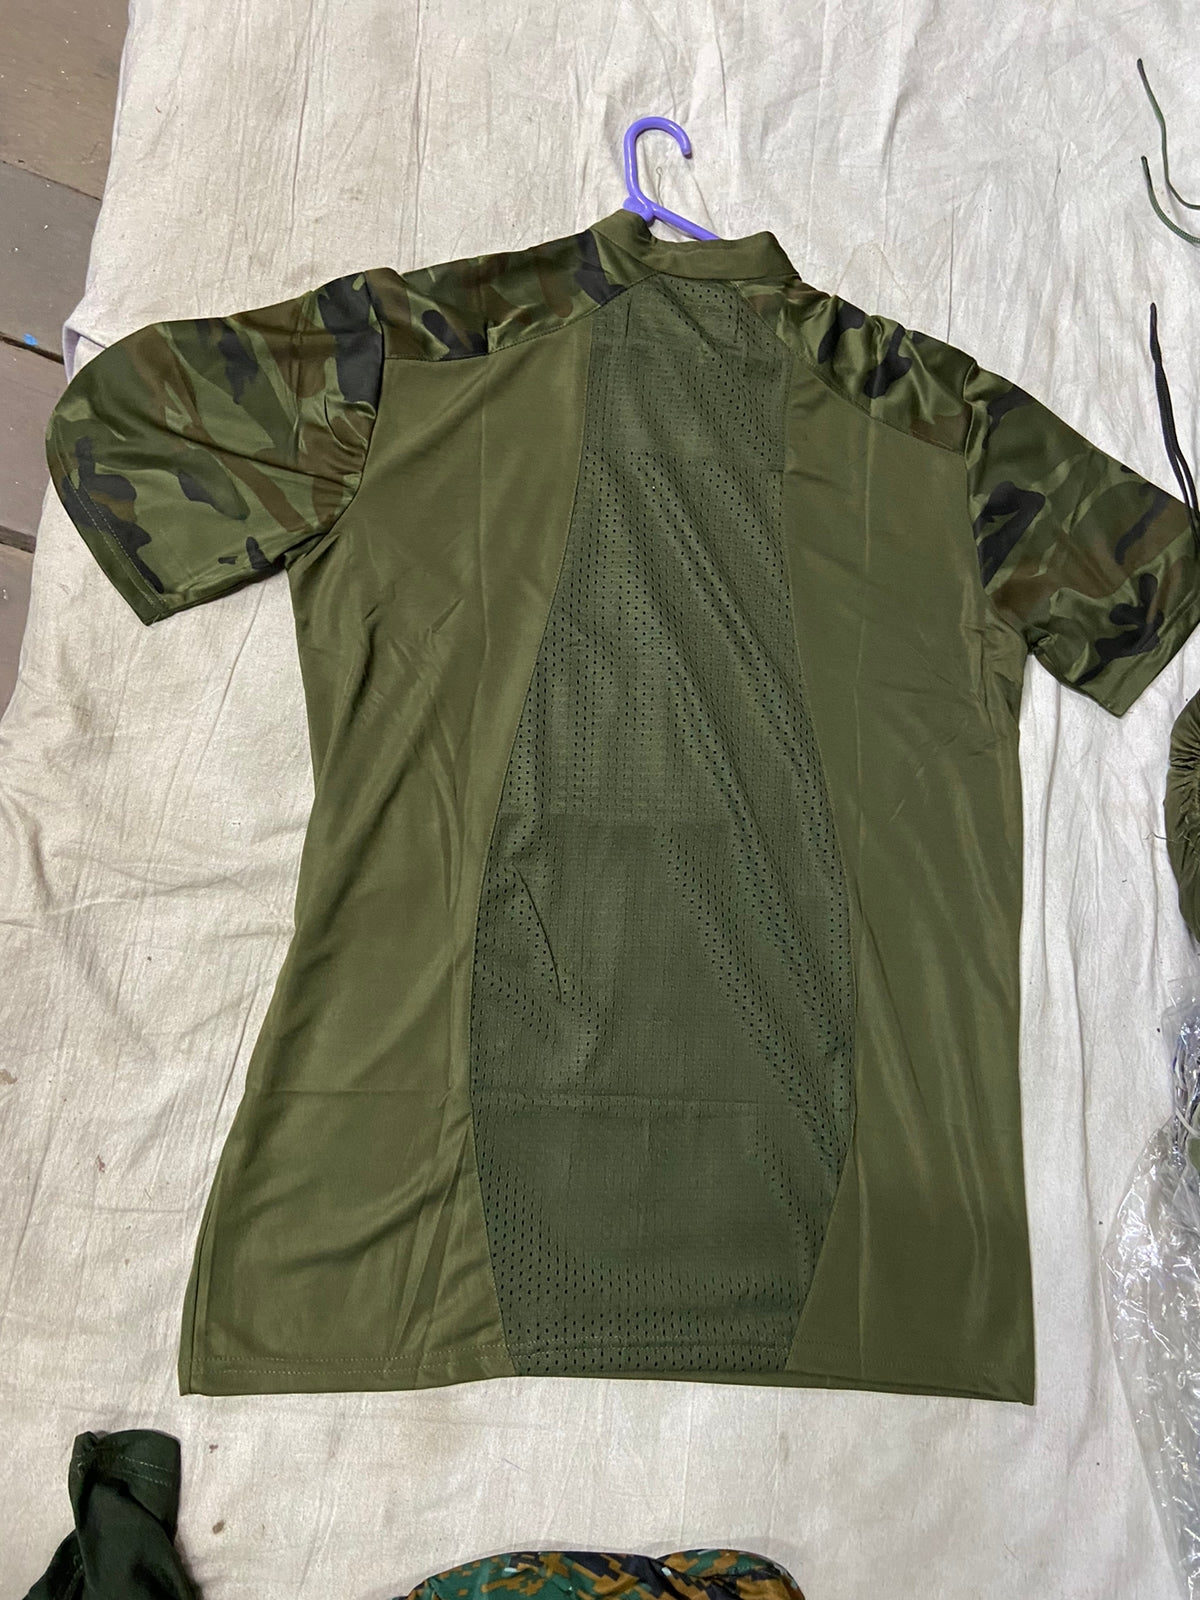 Army T-shirt with net in half Collar (Half)